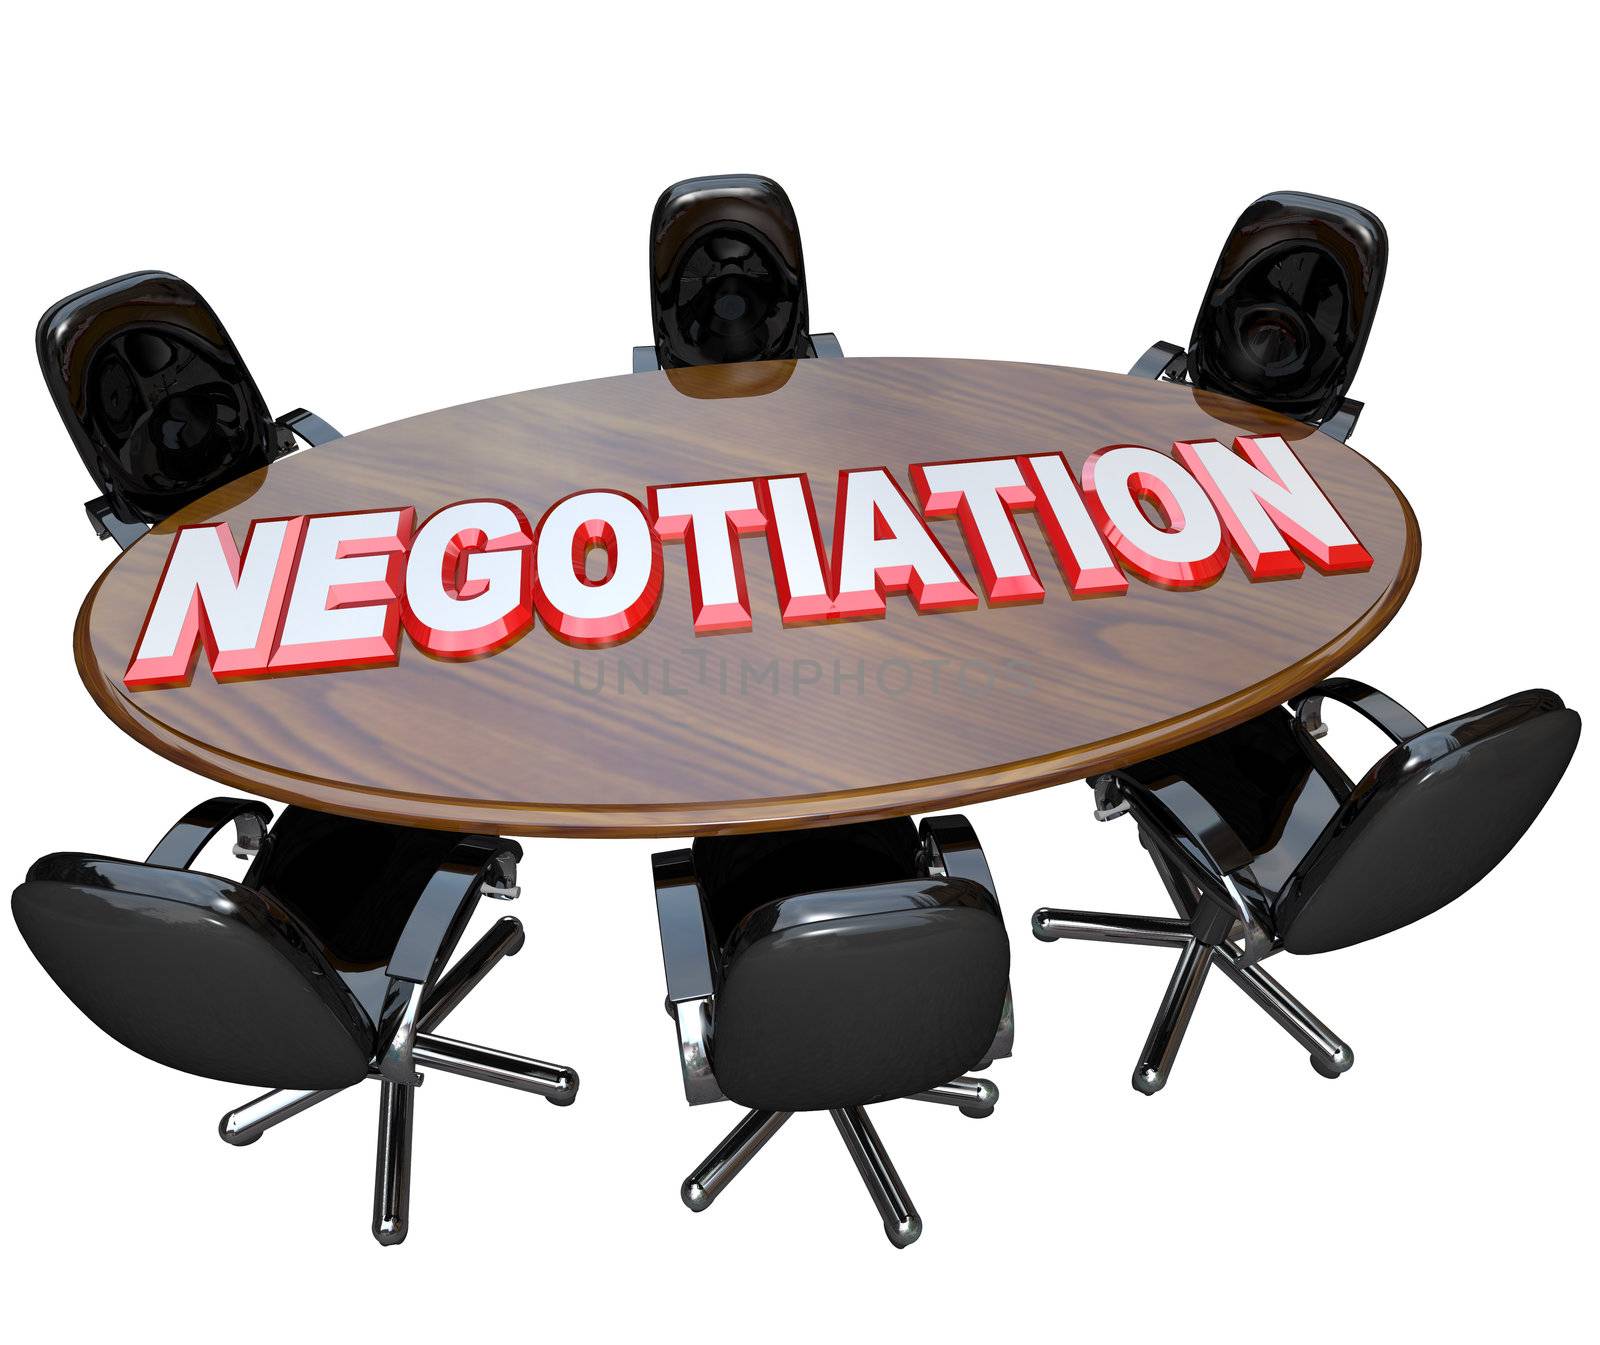 Negotiation Conference Room Table Discussion for Agreement by iQoncept